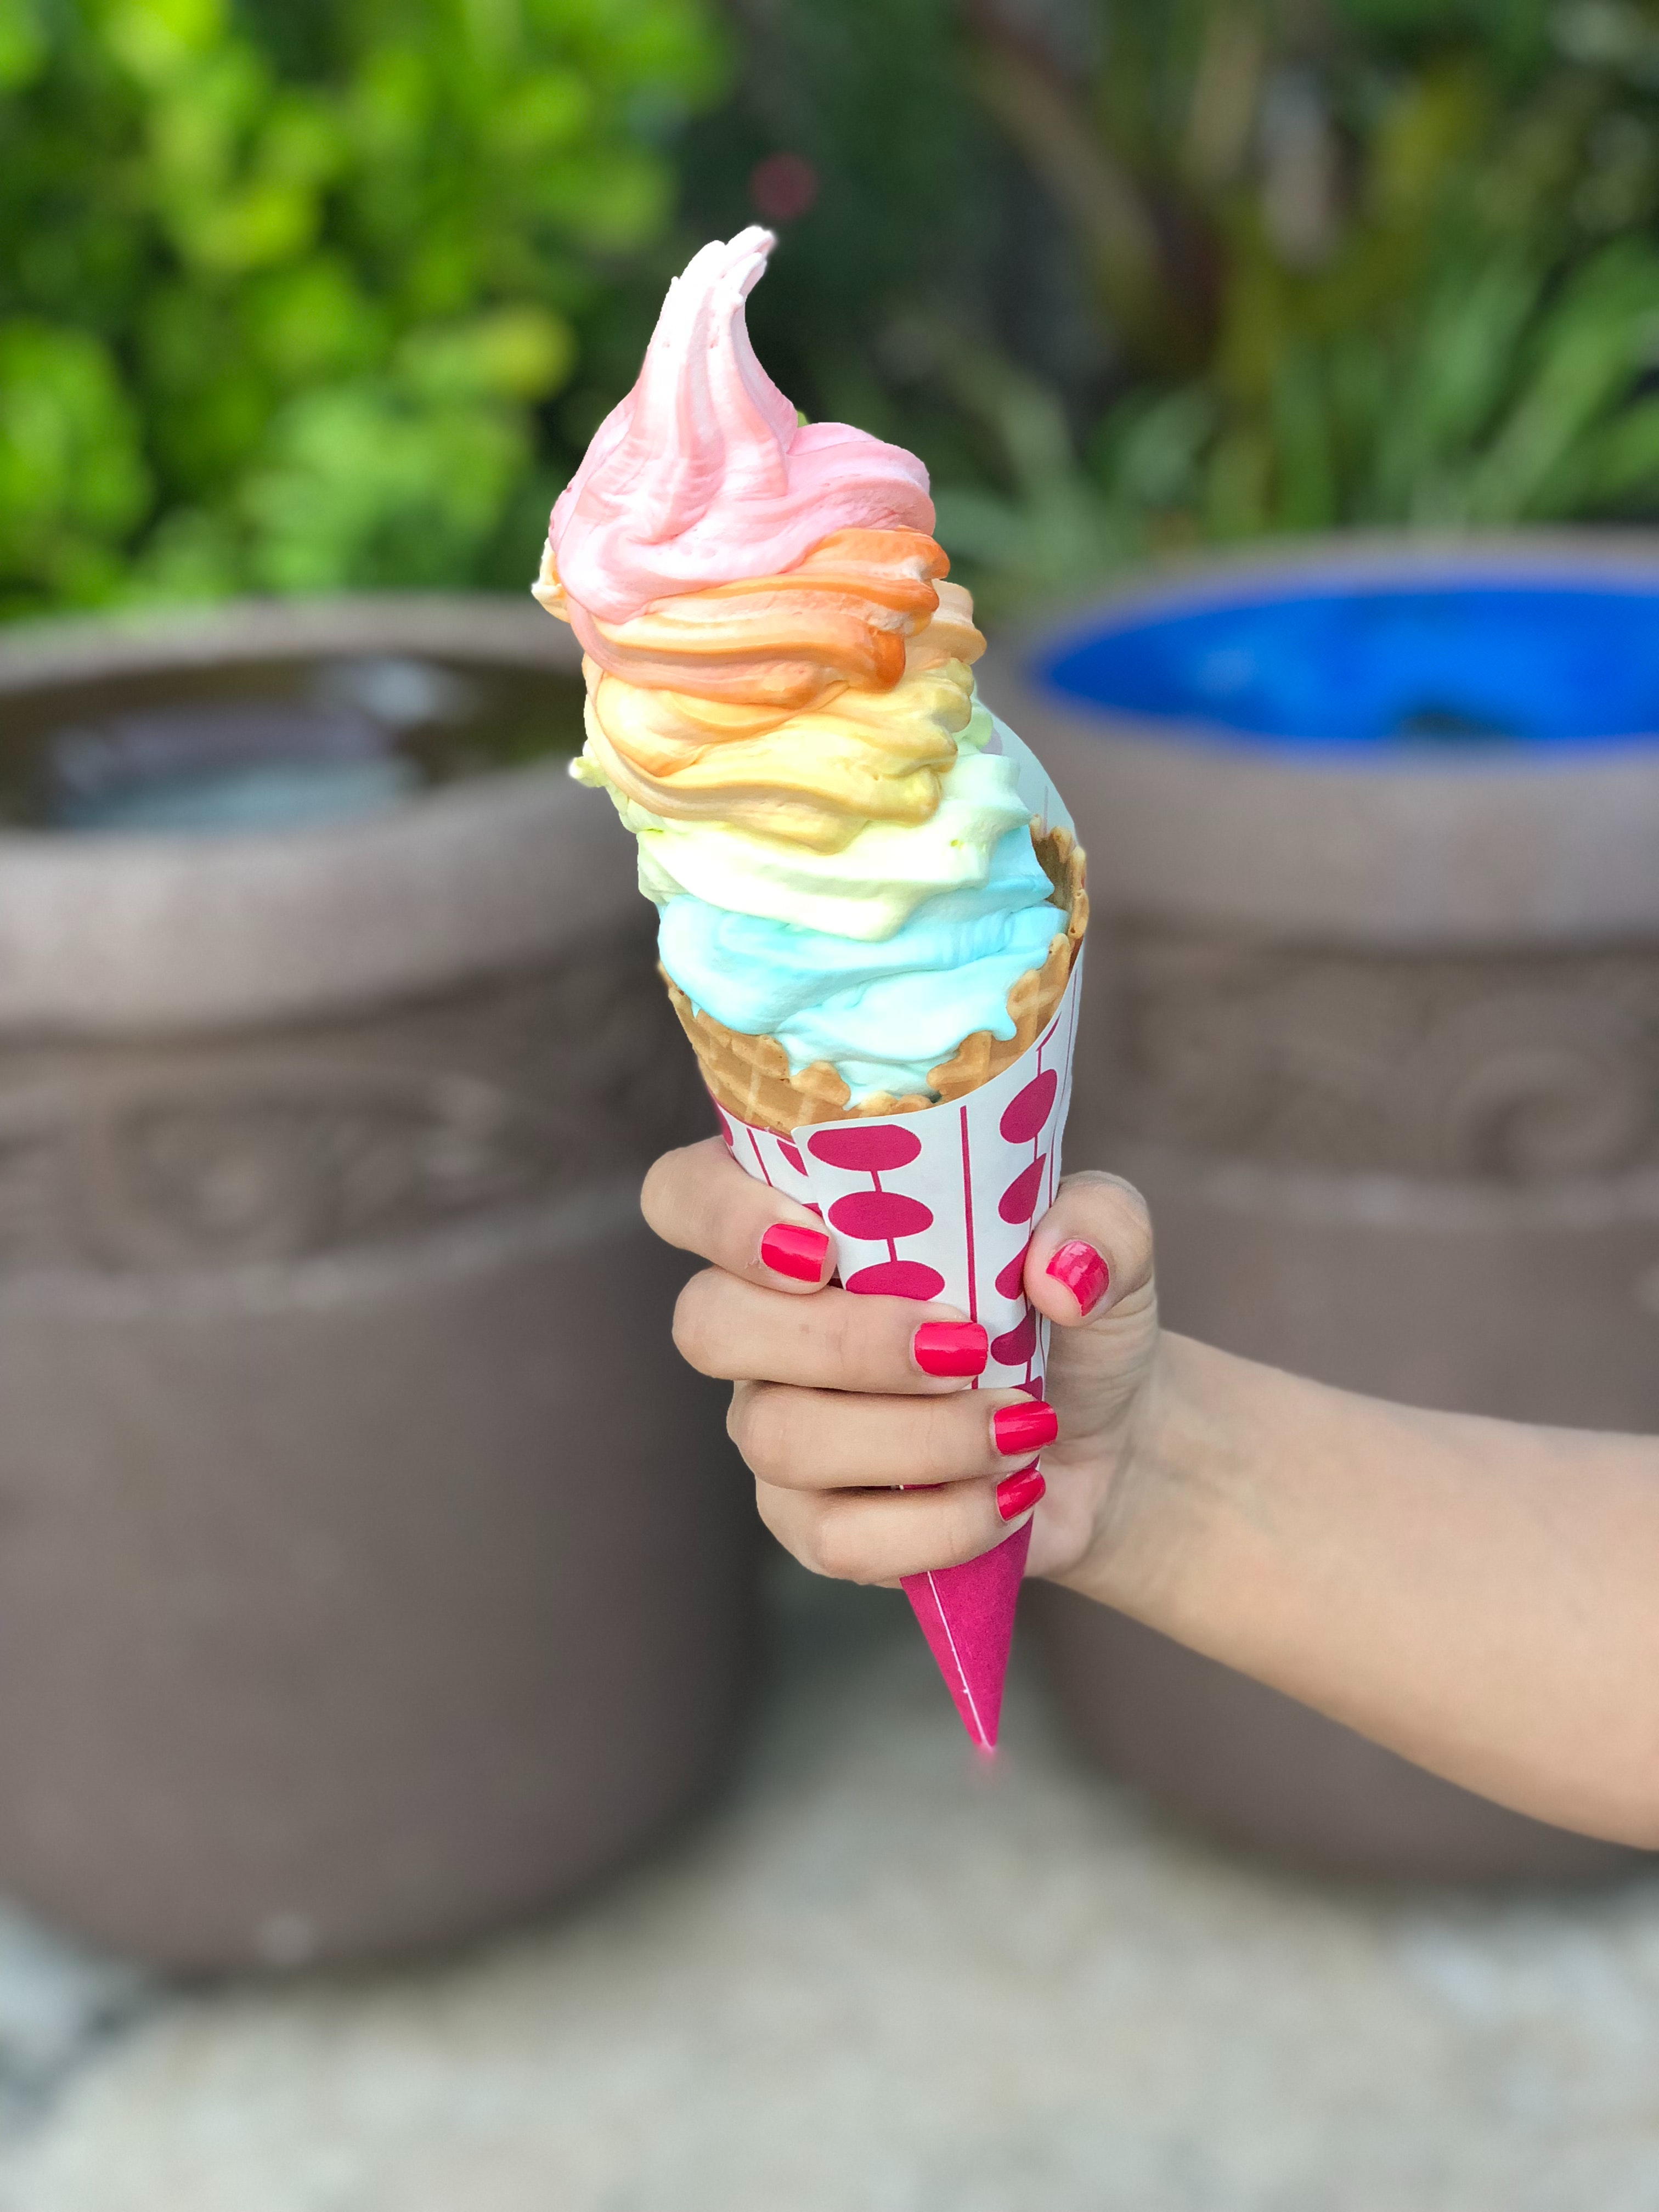 Large, colorful cone of ice cream being held up by a person 